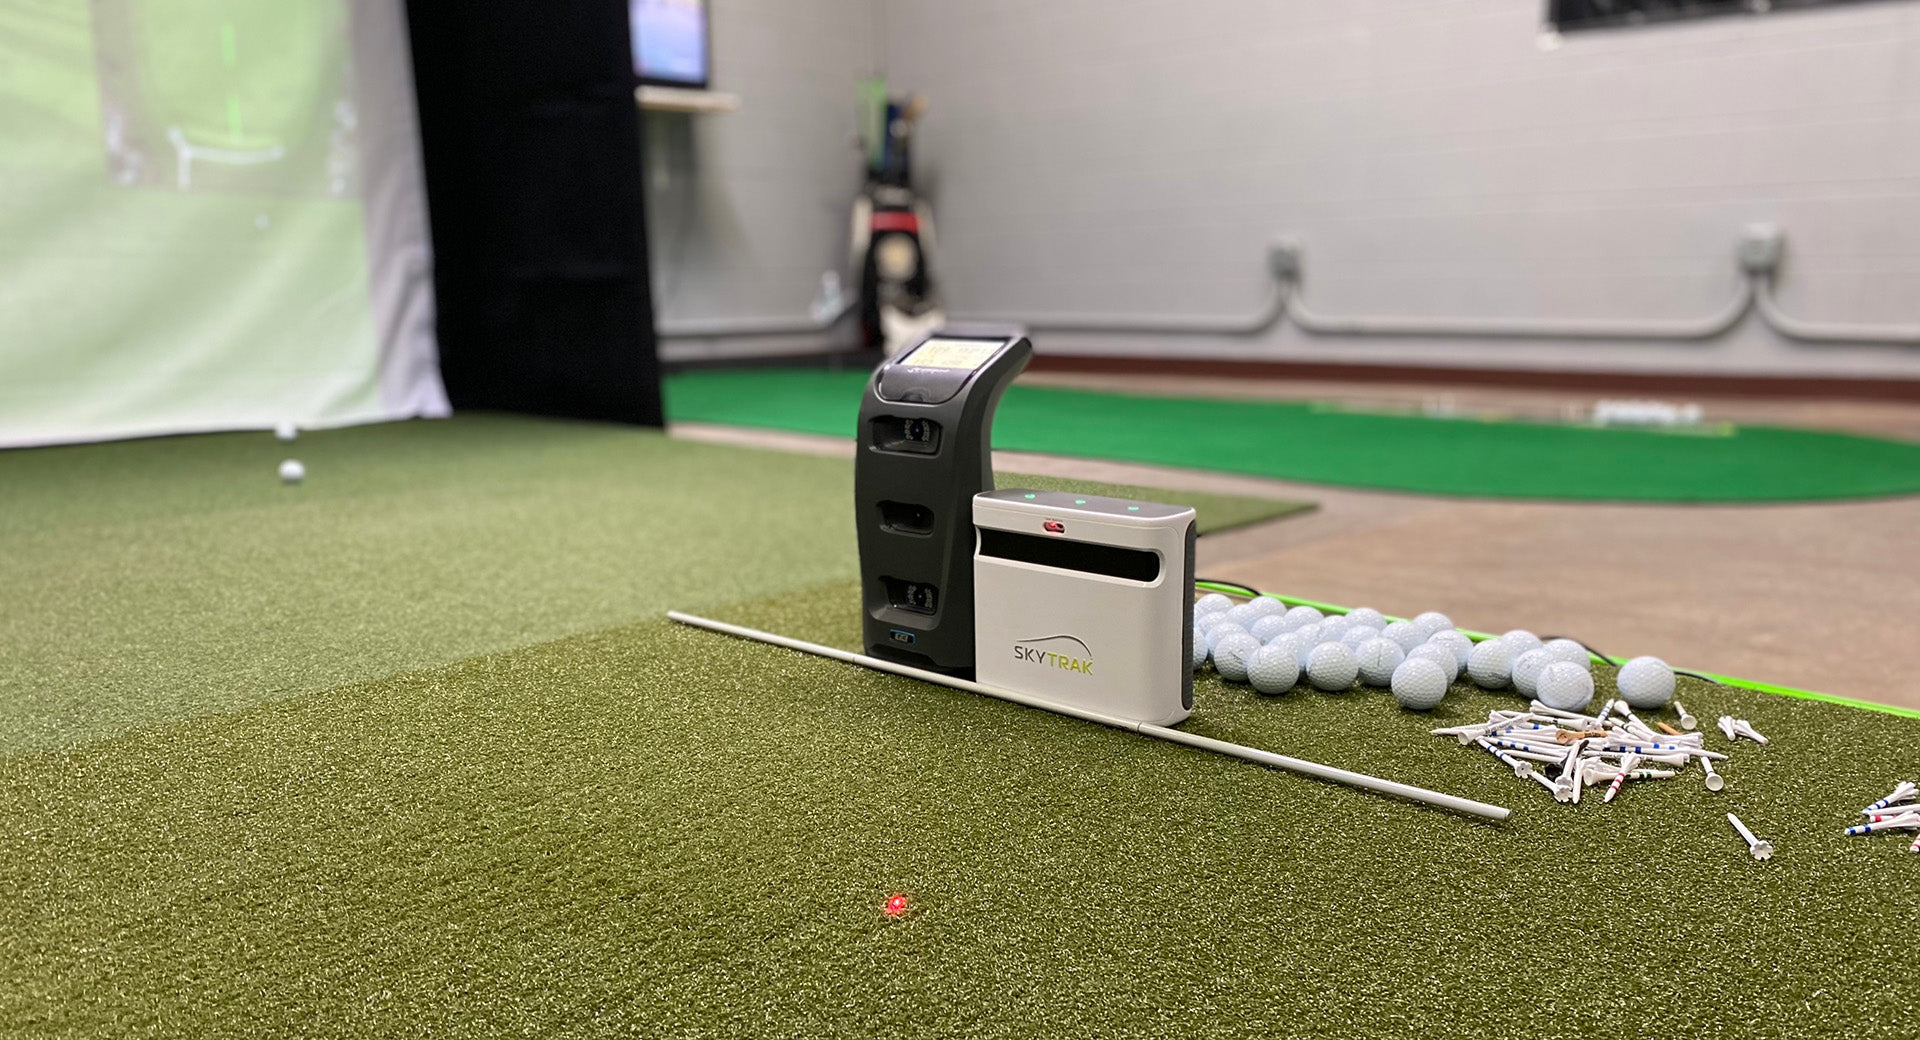 The SkyTrak+ launch monitor next to the Foresight Sports GC3 next to many golf balls and golf tees on a golf mat in an indoor simulator